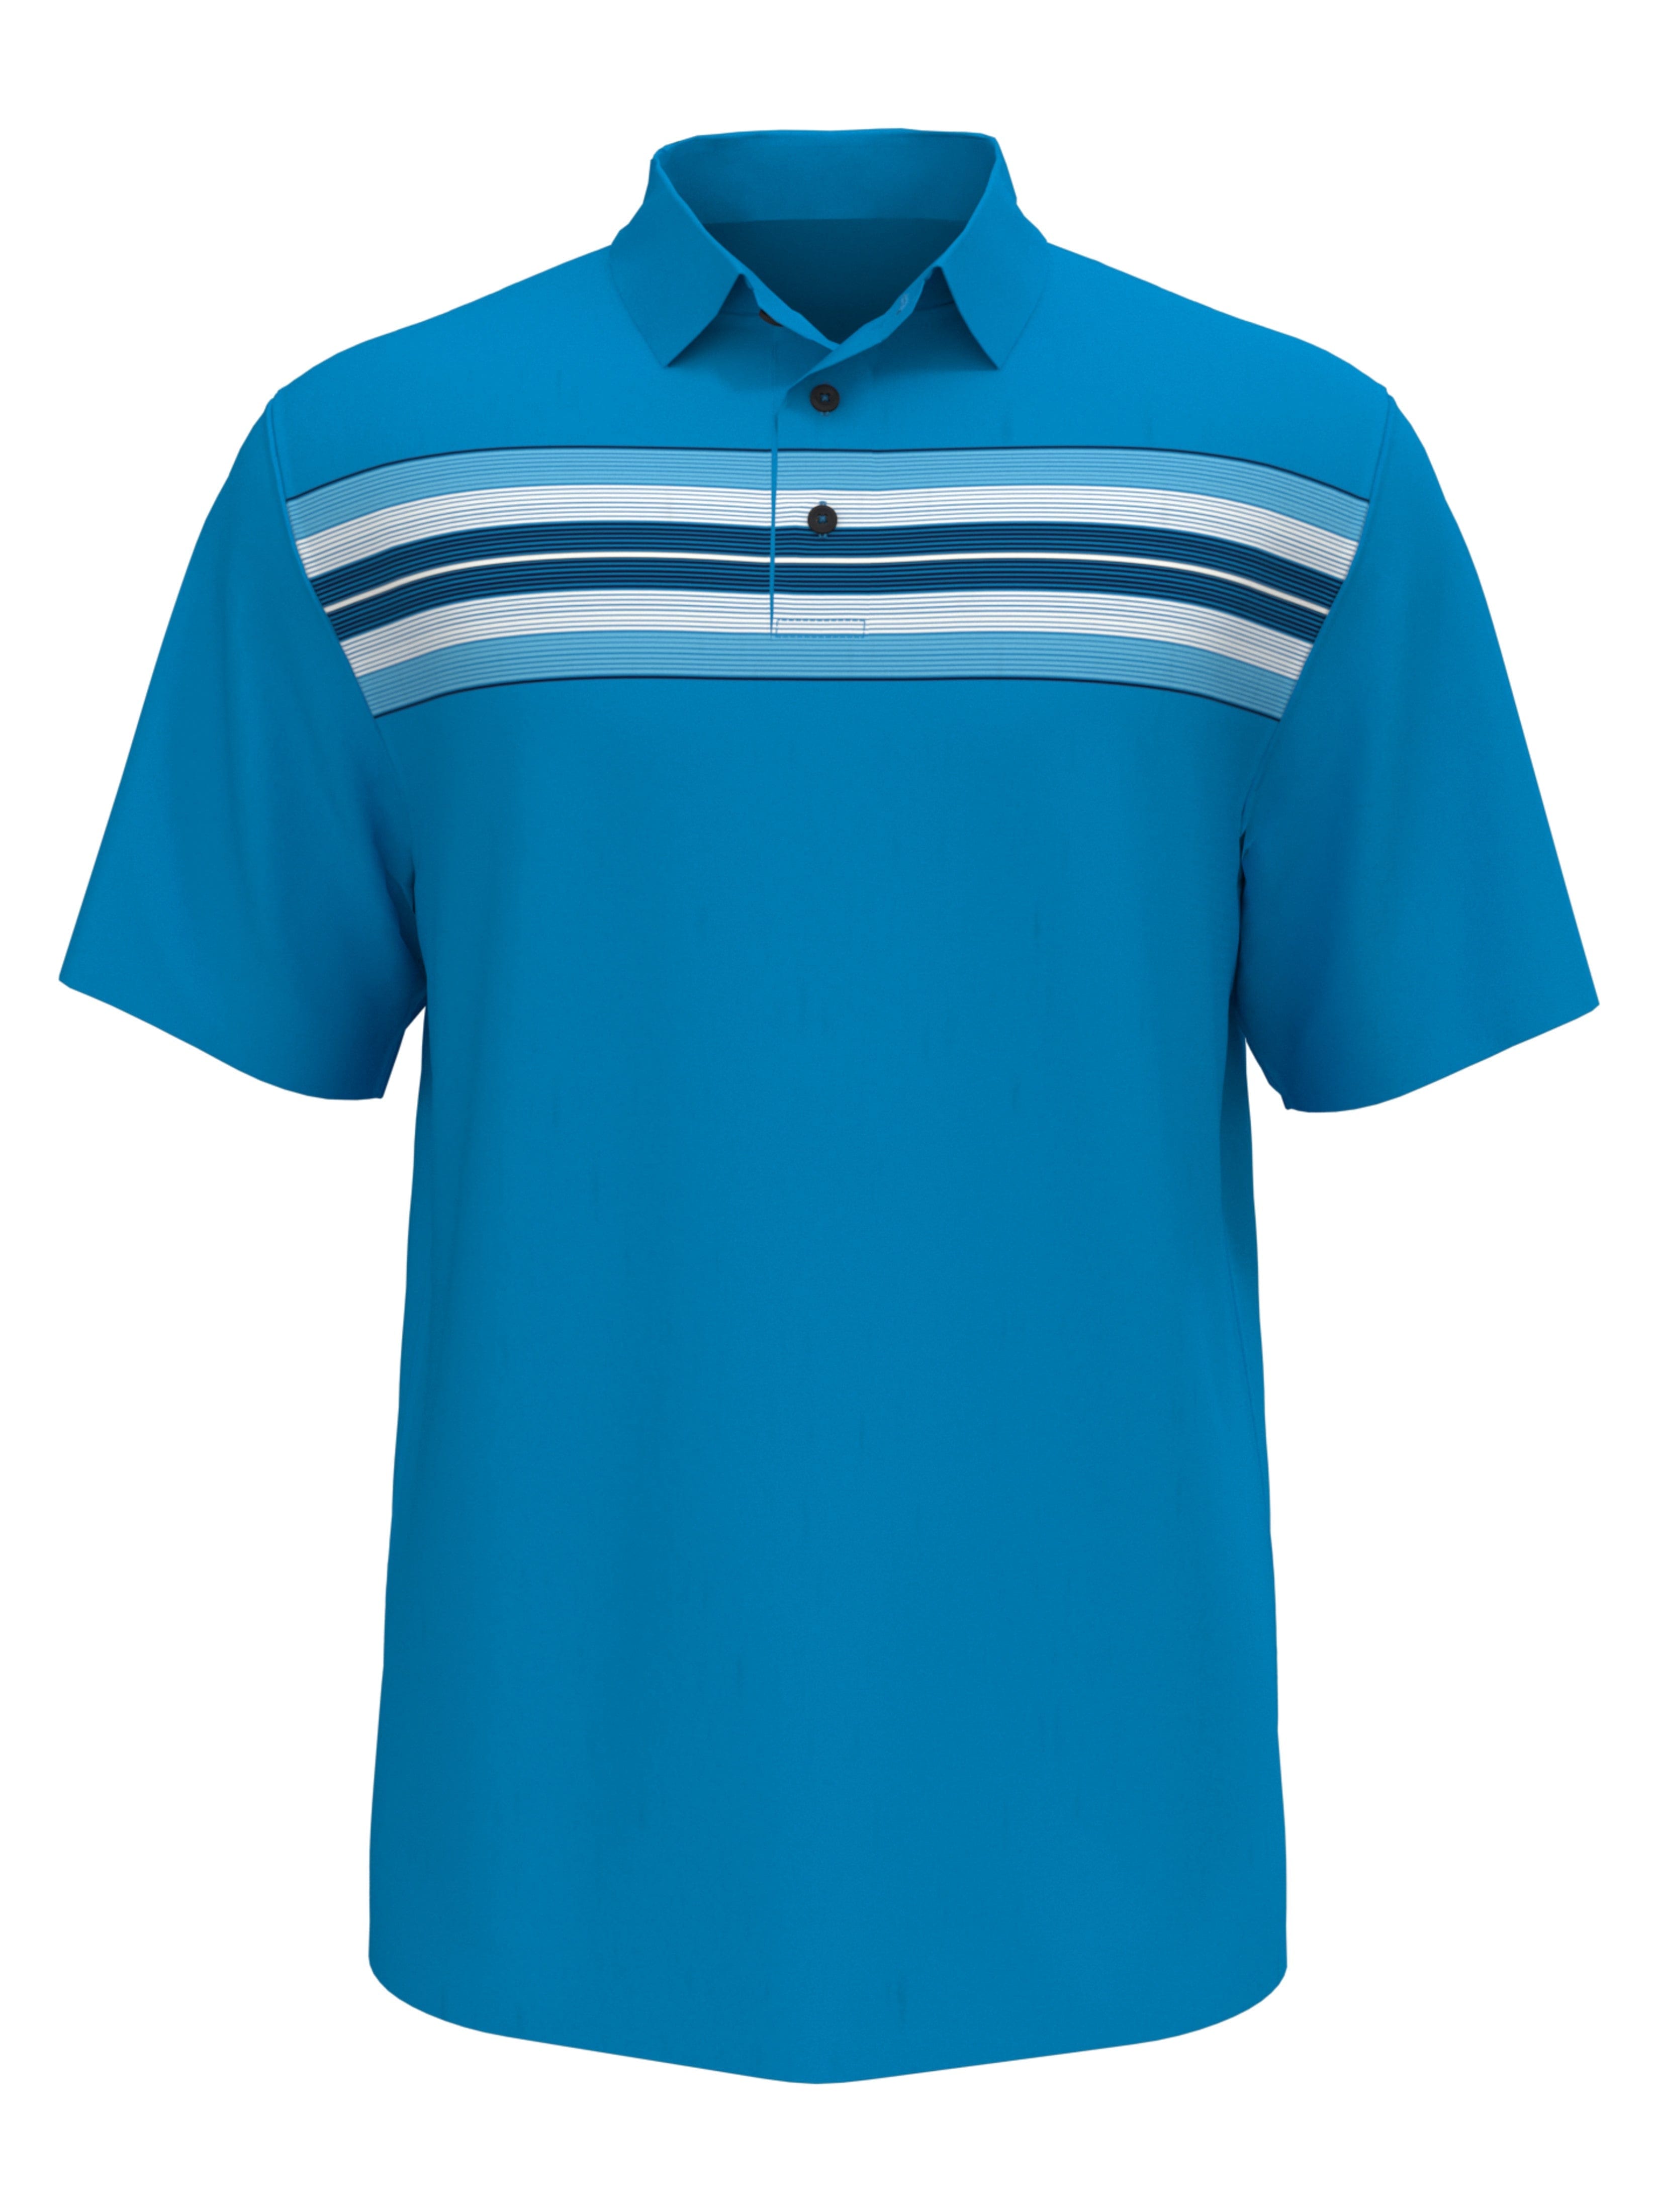 Jack Nicklaus Mens Chest Energy Stripe Polo Shirt, Size XL, Blithe Blue, 100% Polyester | Golf Apparel Shop